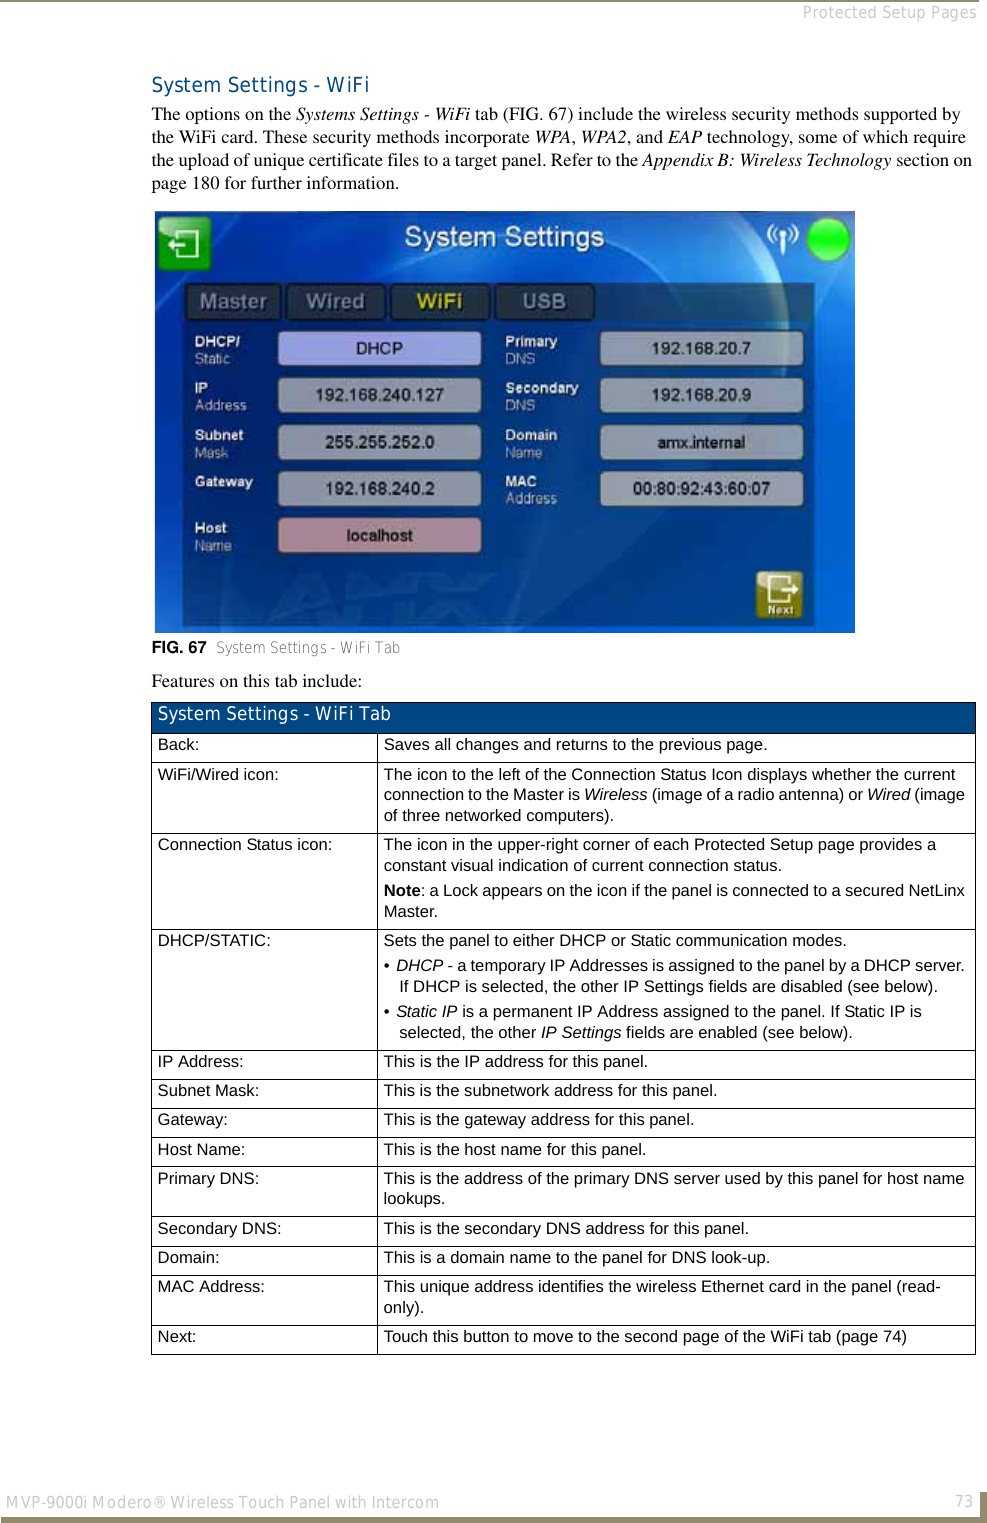 Protected Setup Pages73MVP-9000i Modero® Wireless Touch Panel with IntercomSystem Settings - WiFiThe options on the Systems Settings - WiFi tab (FIG. 67) include the wireless security methods supported by the WiFi card. These security methods incorporate WPA, WPA2, and EAP technology, some of which require the upload of unique certificate files to a target panel. Refer to the Appendix B: Wireless Technology section on page 180 for further information.Features on this tab include:FIG. 67  System Settings - WiFi TabSystem Settings - WiFi TabBack: Saves all changes and returns to the previous page.WiFi/Wired icon: The icon to the left of the Connection Status Icon displays whether the current connection to the Master is Wireless (image of a radio antenna) or Wired (image of three networked computers).Connection Status icon: The icon in the upper-right corner of each Protected Setup page provides a constant visual indication of current connection status.Note: a Lock appears on the icon if the panel is connected to a secured NetLinx Master.DHCP/STATIC: Sets the panel to either DHCP or Static communication modes. •DHCP - a temporary IP Addresses is assigned to the panel by a DHCP server. If DHCP is selected, the other IP Settings fields are disabled (see below).•Static IP is a permanent IP Address assigned to the panel. If Static IP is selected, the other IP Settings fields are enabled (see below).IP Address: This is the IP address for this panel.Subnet Mask: This is the subnetwork address for this panel.Gateway: This is the gateway address for this panel.Host Name: This is the host name for this panel.Primary DNS: This is the address of the primary DNS server used by this panel for host name lookups.Secondary DNS: This is the secondary DNS address for this panel.Domain: This is a domain name to the panel for DNS look-up.MAC Address: This unique address identifies the wireless Ethernet card in the panel (read-only). Next: Touch this button to move to the second page of the WiFi tab (page 74)